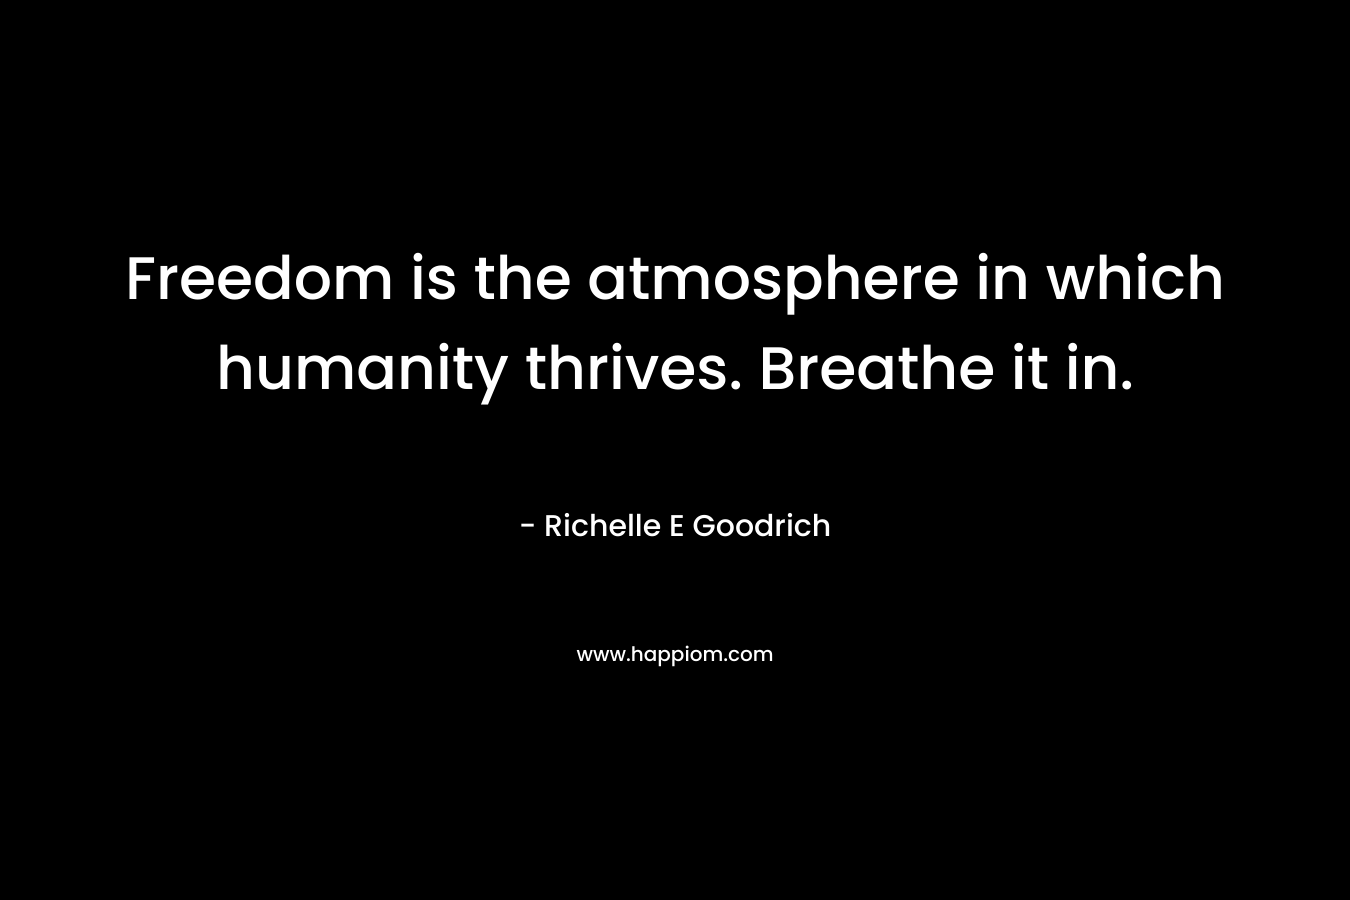 Freedom is the atmosphere in which humanity thrives. Breathe it in.